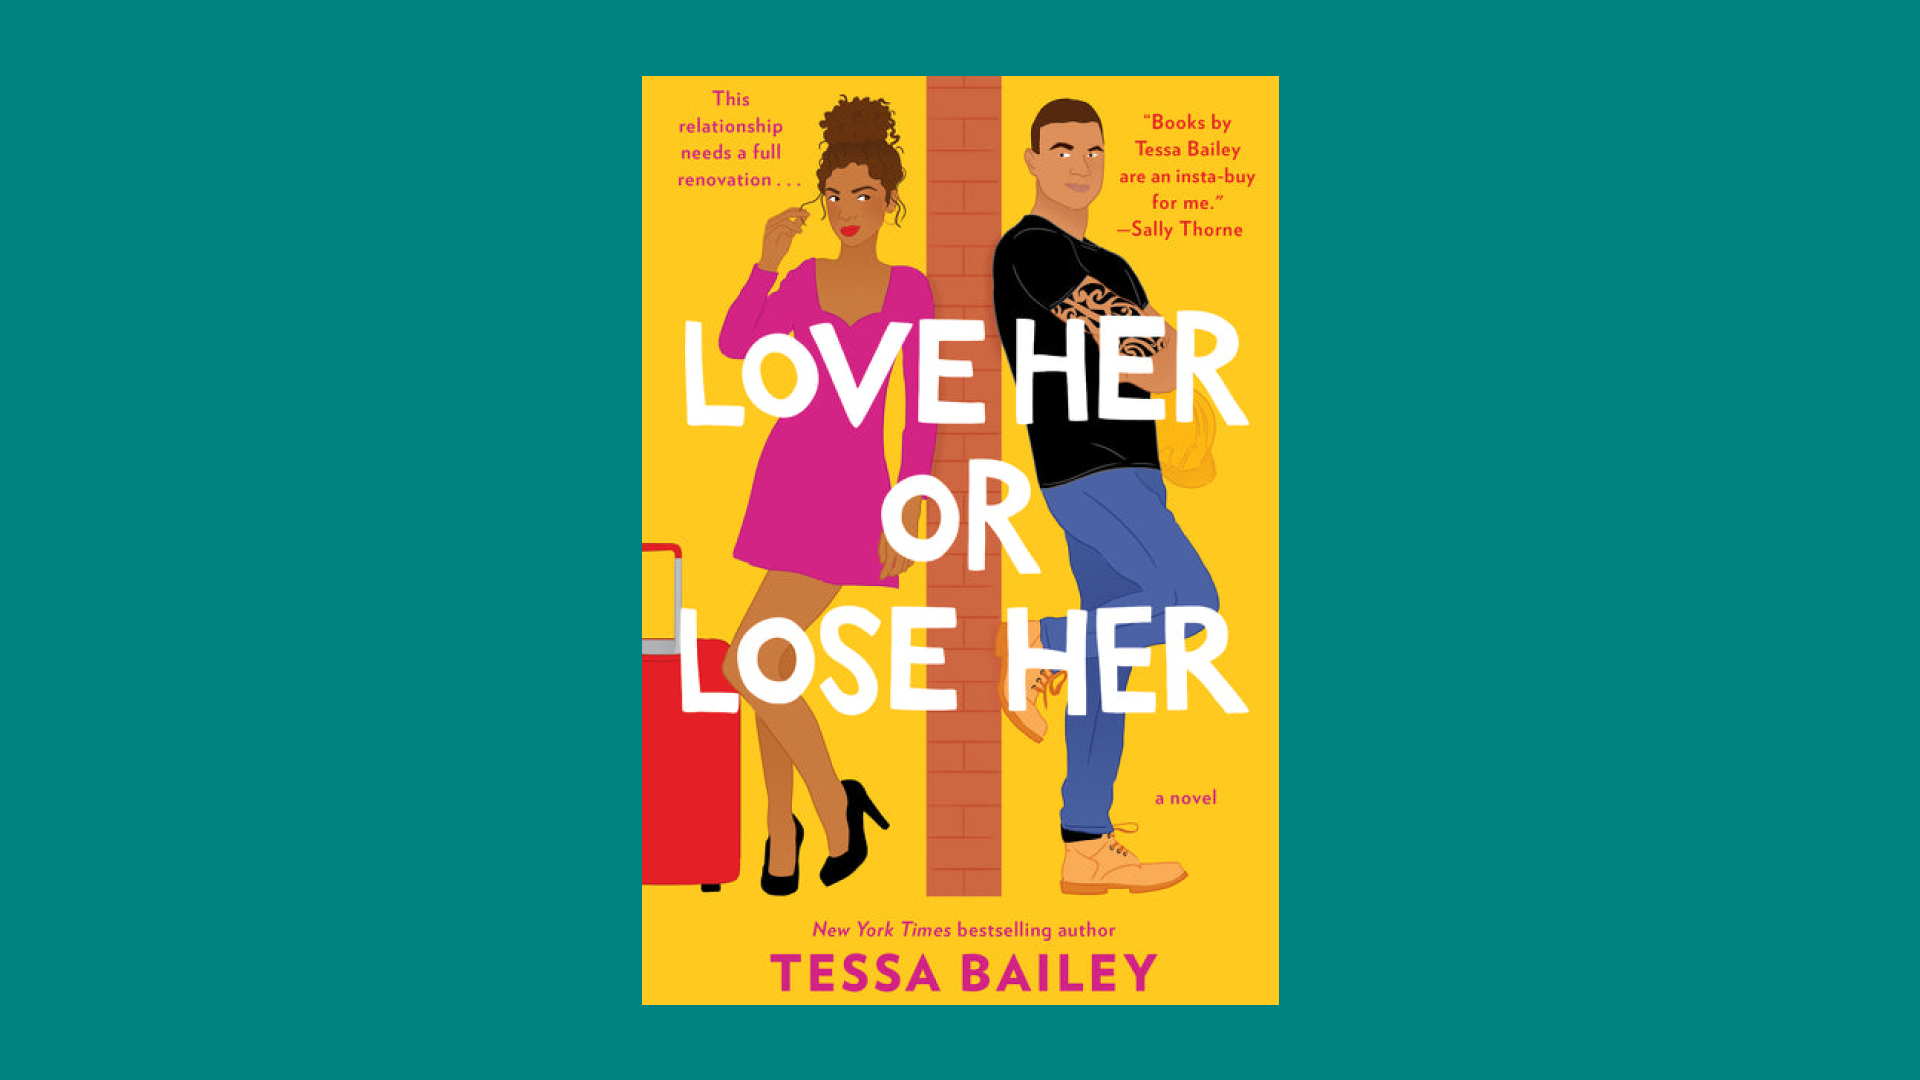 “Love Her or Lose Her” by Tessa Bailey